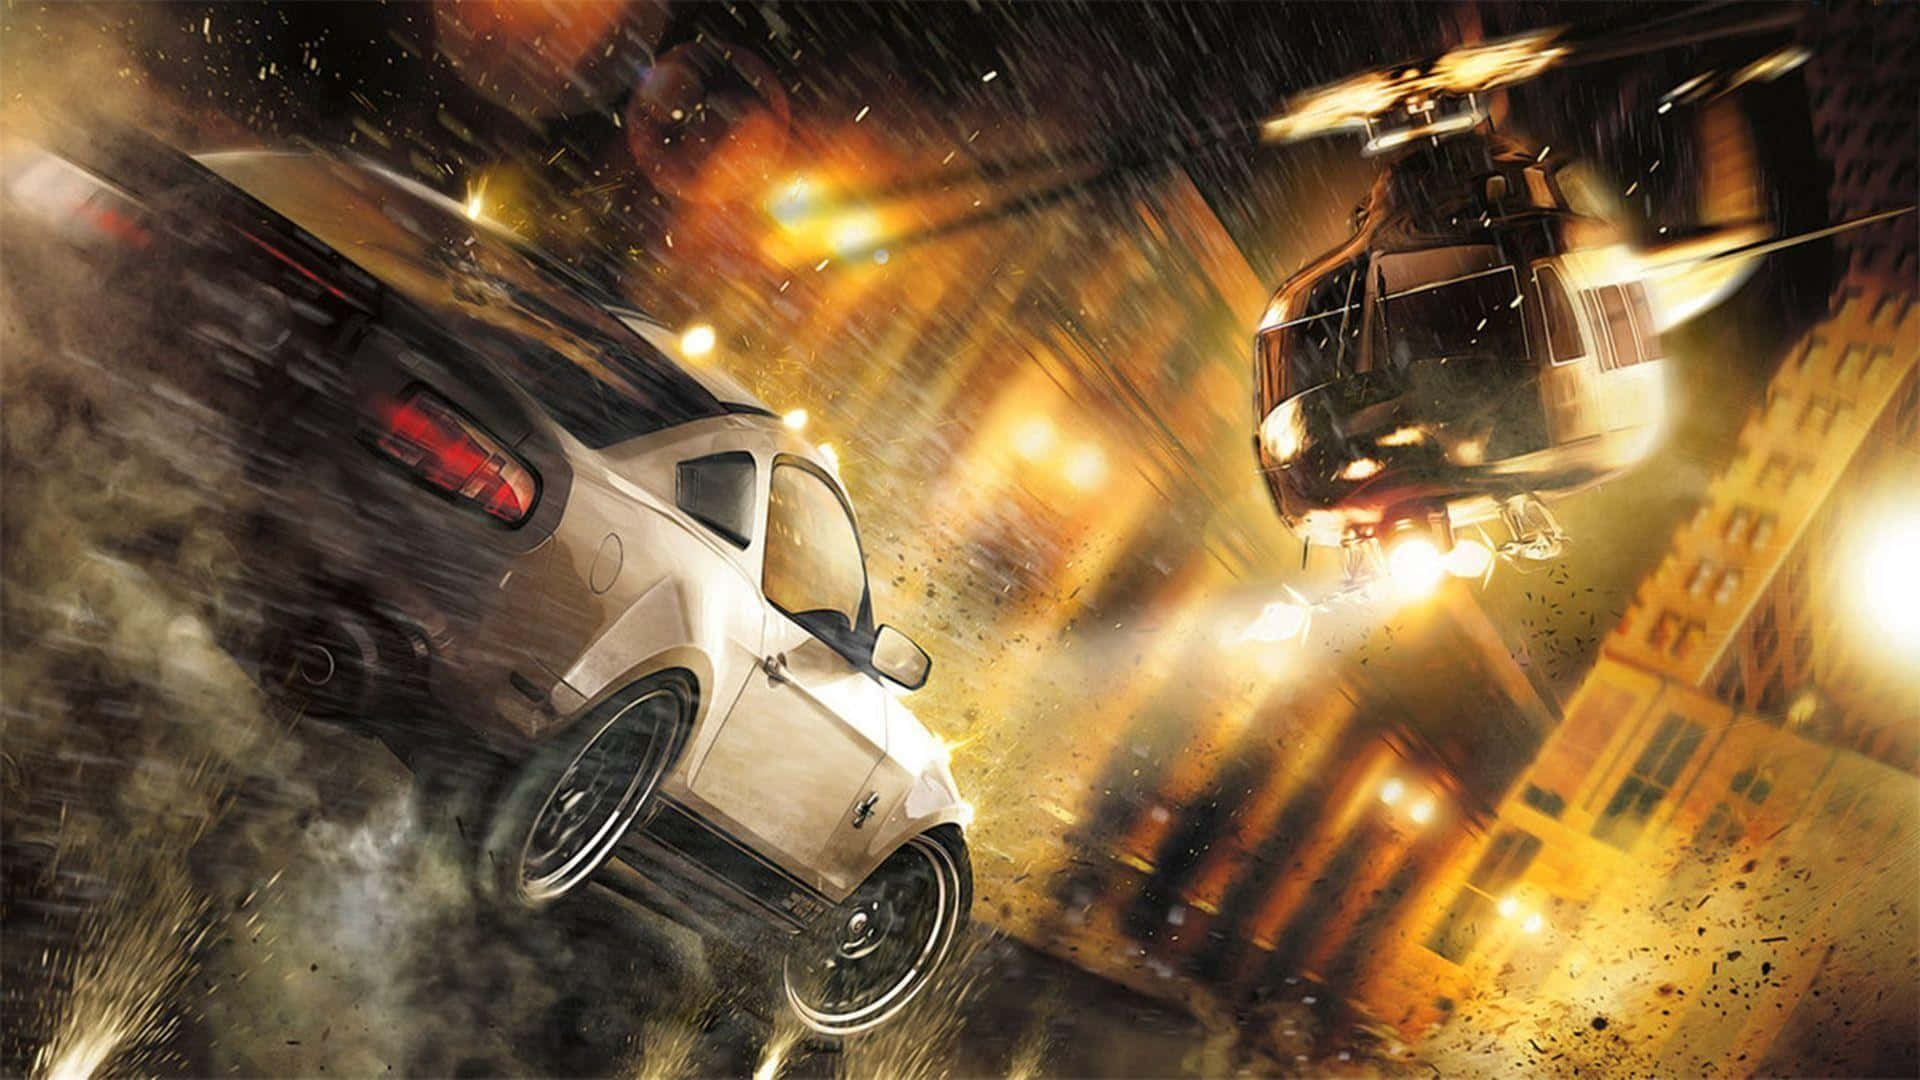 Nfs The Run Mustang Helicopter Wallpaper